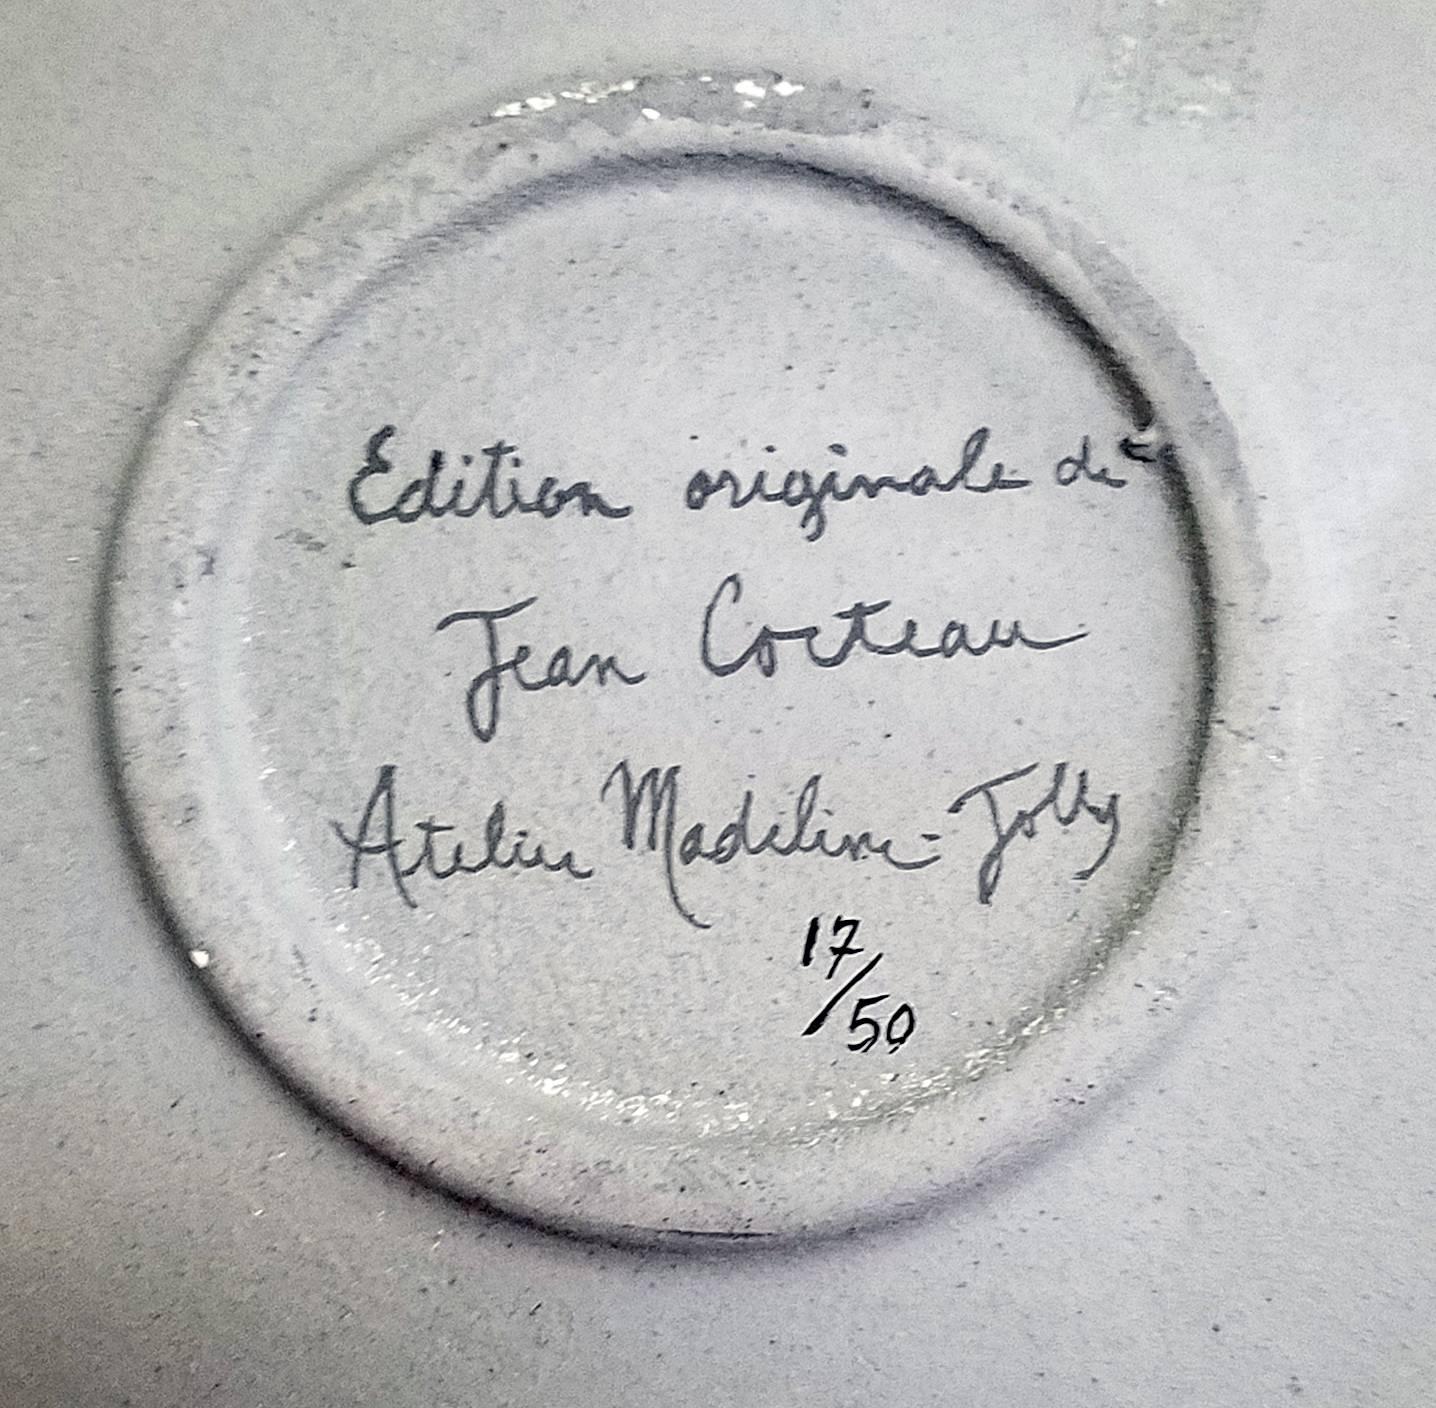 Jean Cocteau terracotta pottery dish,
Danseuse et Musiciens,
Signed and dated by Jean Cocteau 1958
Number 17 of an Edition of 50.

Jean Cocteau ceramic dish with grey engobe, oxide crayon and coloured glaze and painted with three stylized Greek